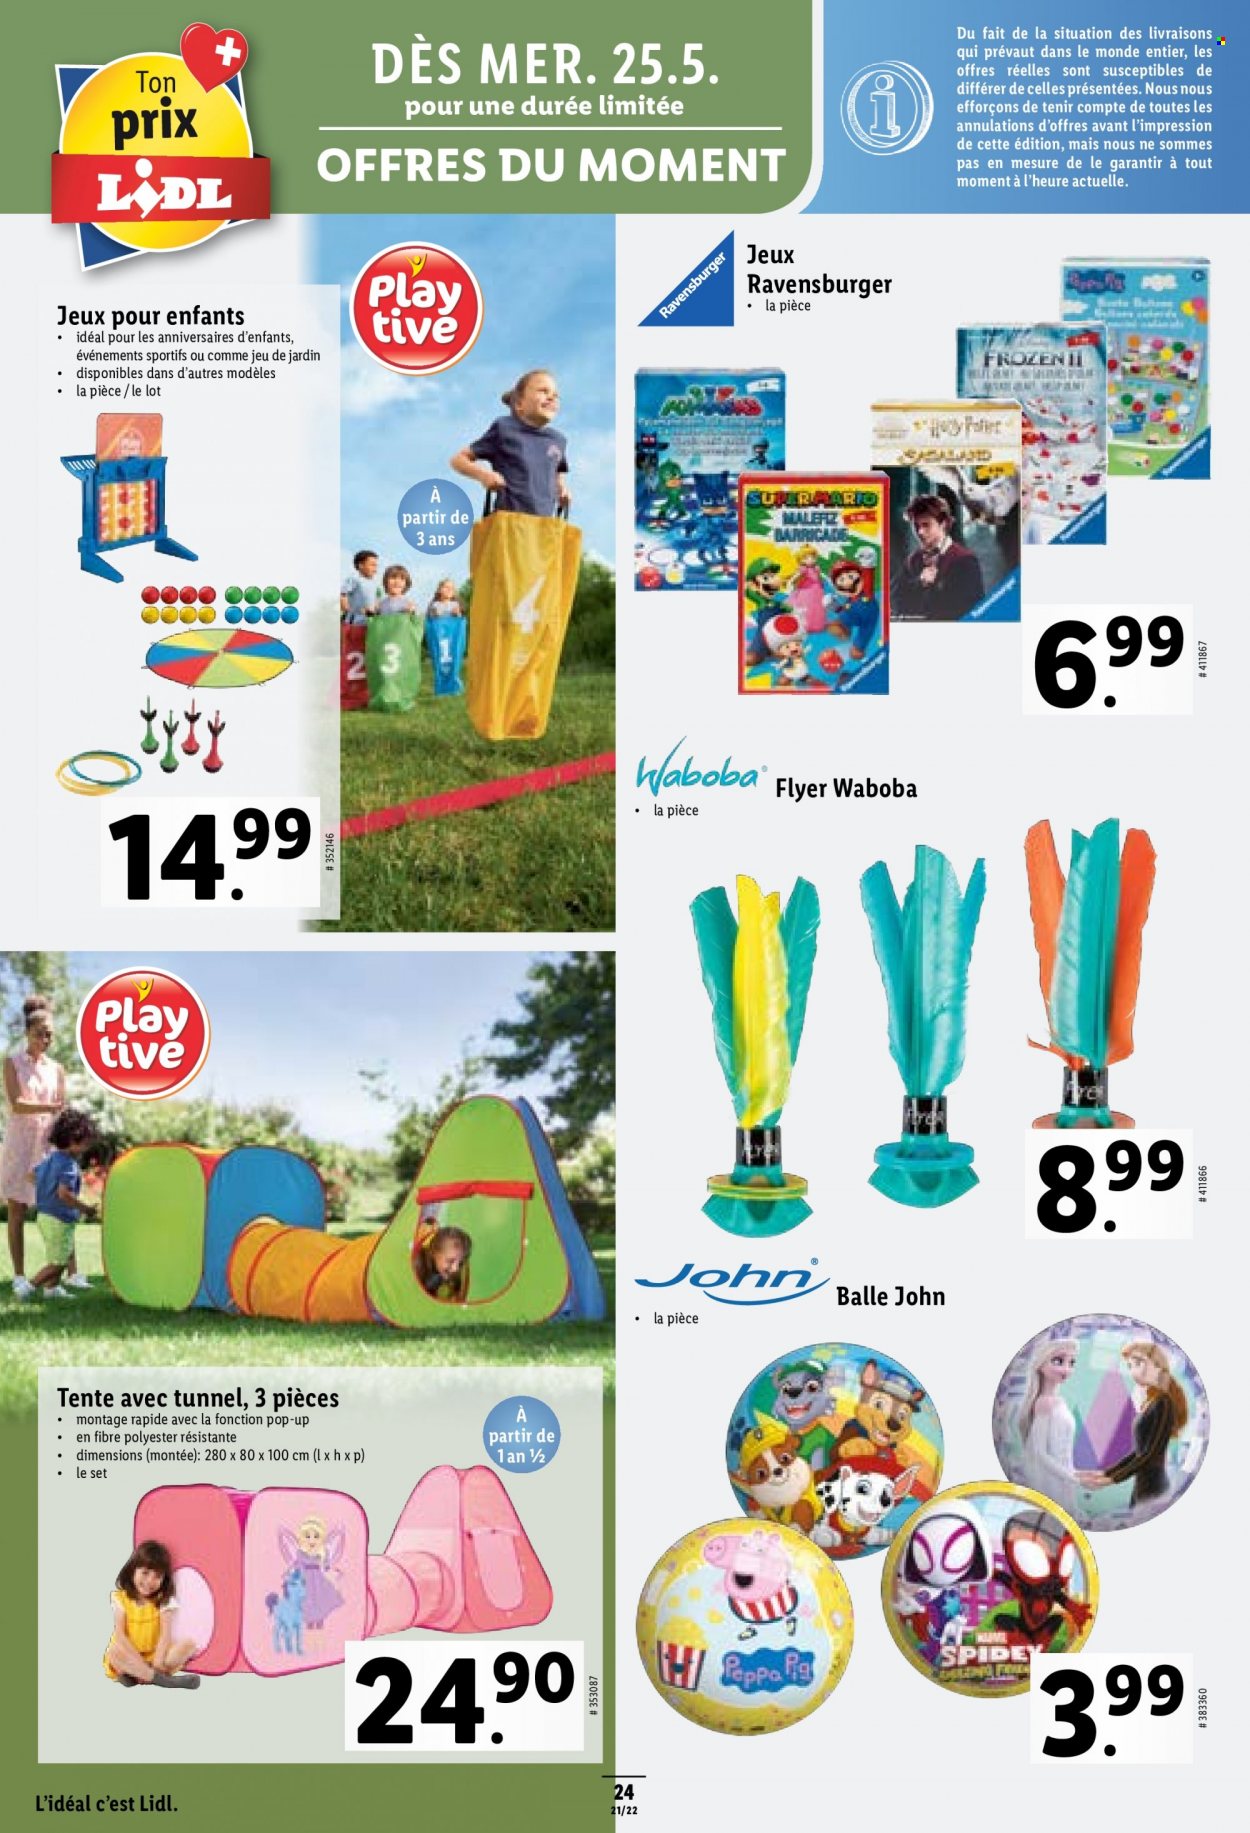 Catalogue Lidl - 25.5.2022 - 1.6.2022. Page 24.